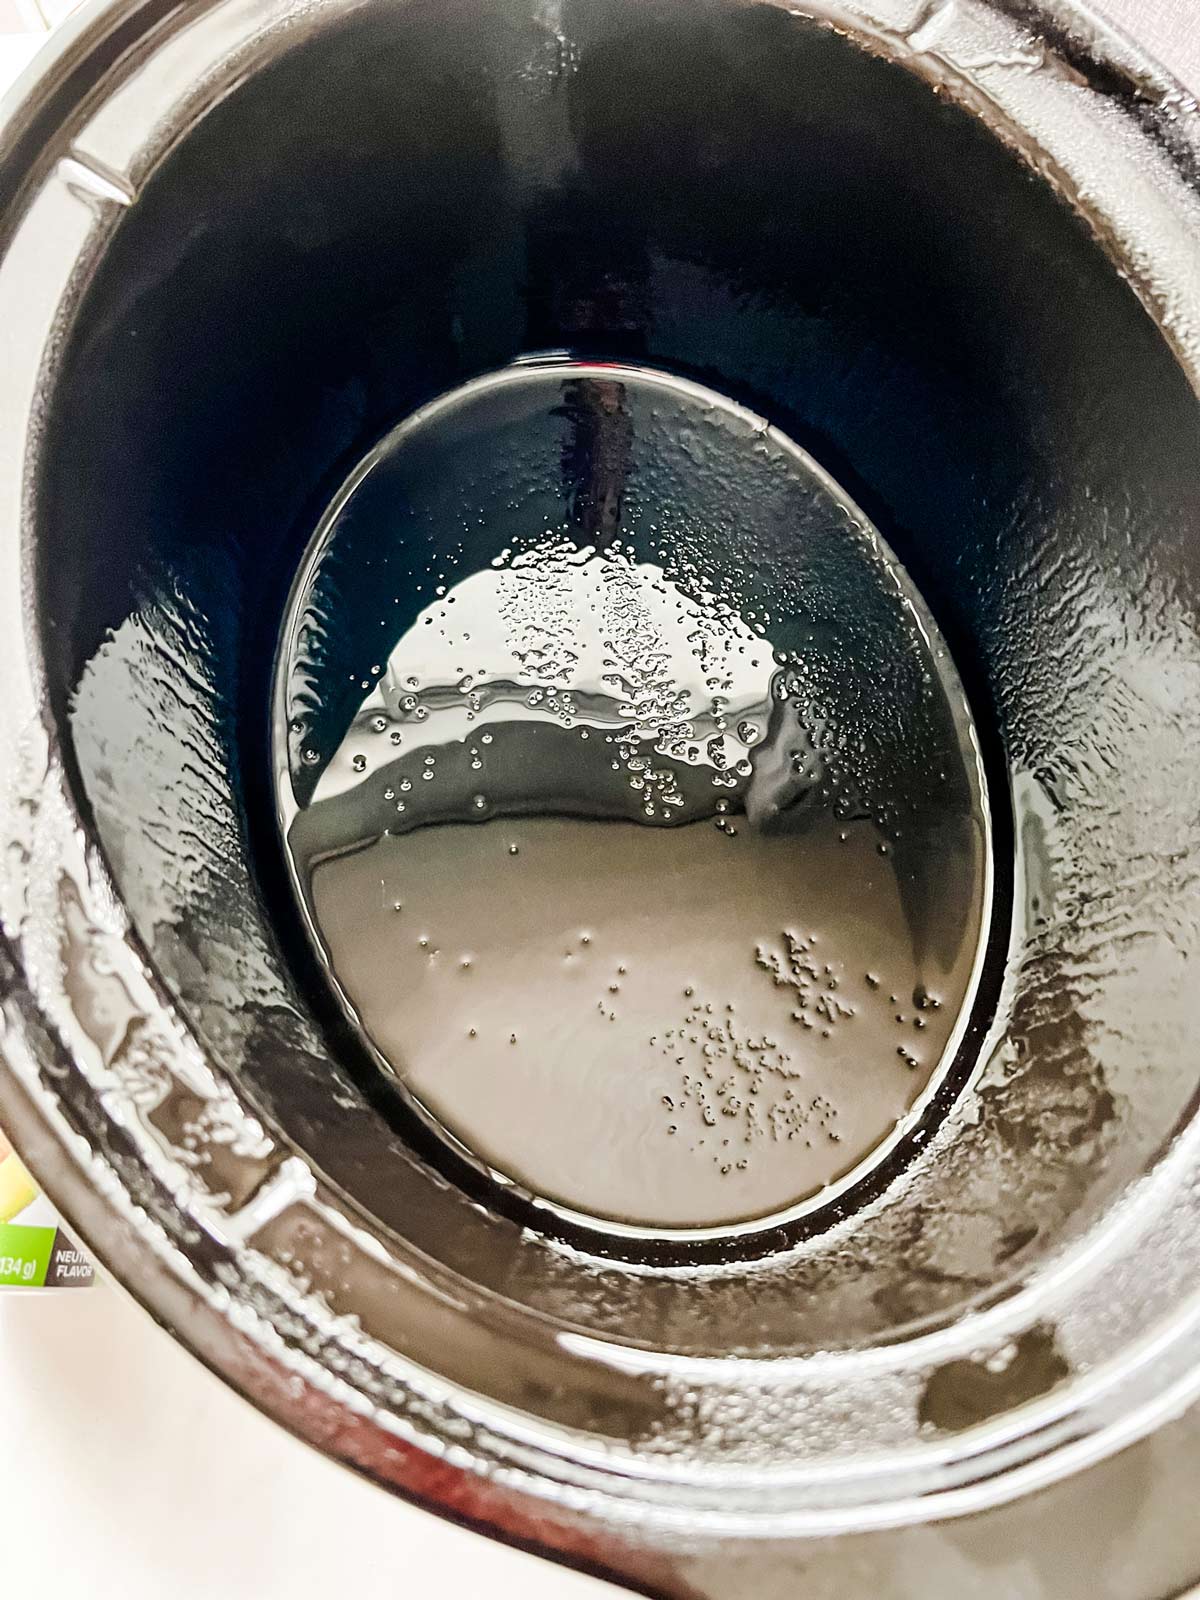 A slow cooker sprayed with cooking spray.